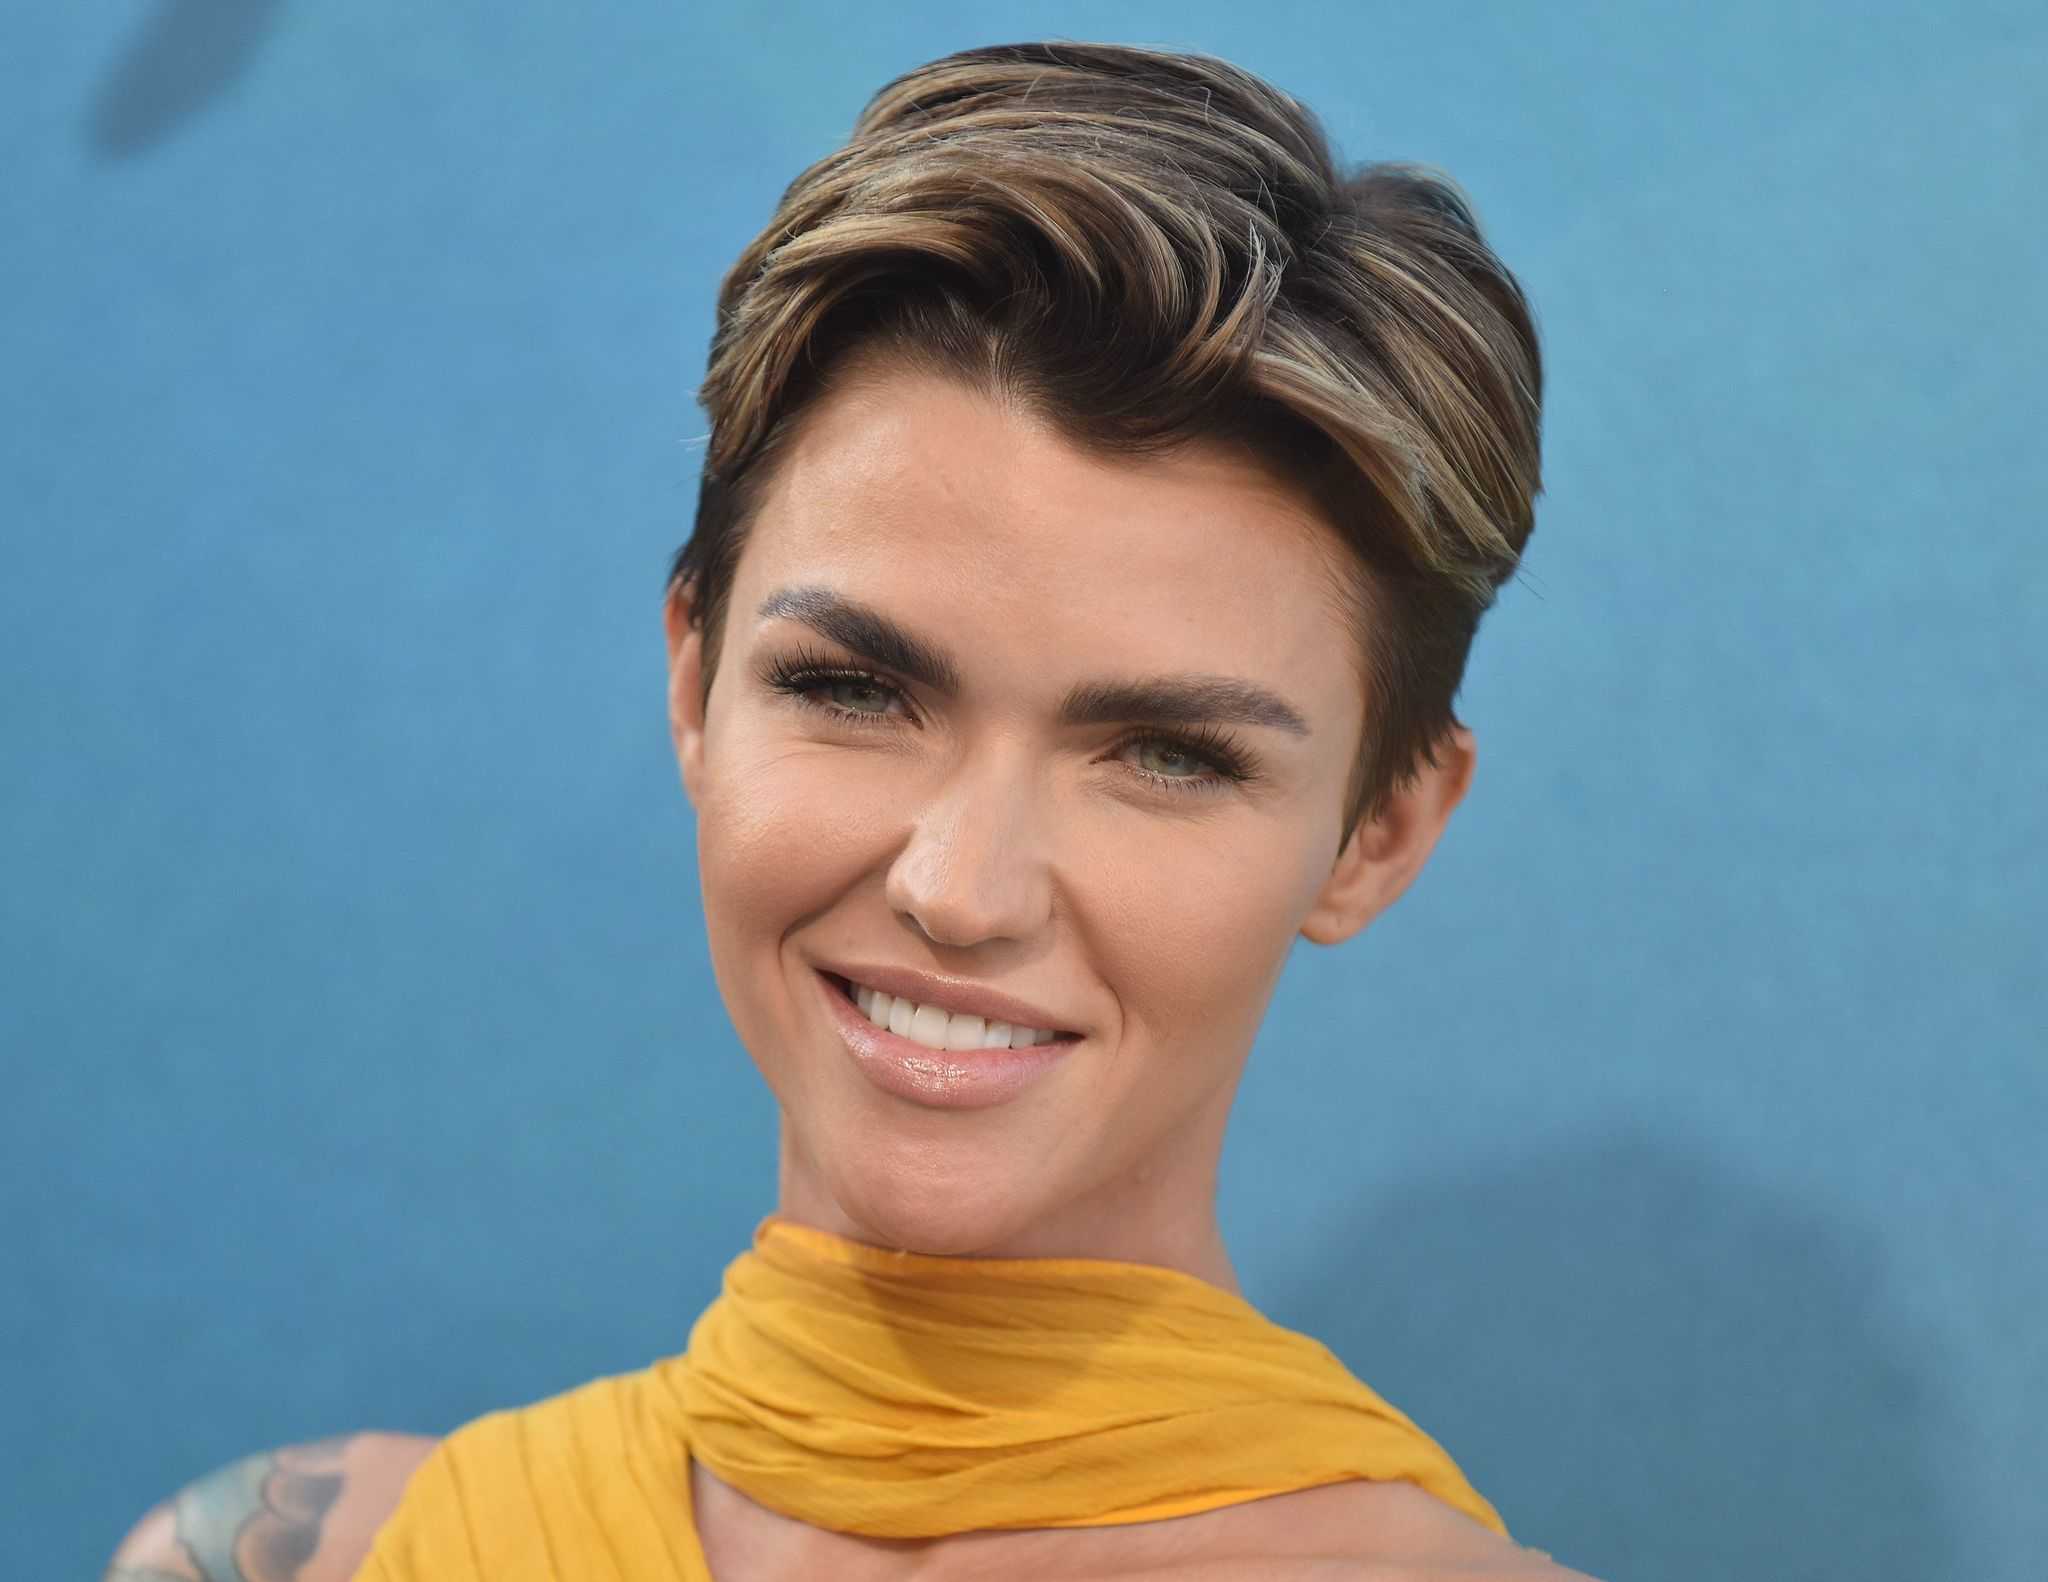 70+ Hot Pictures Of Ruby Rose – Batgirl In Arrowverse And Orange Is The New Black Star. 90